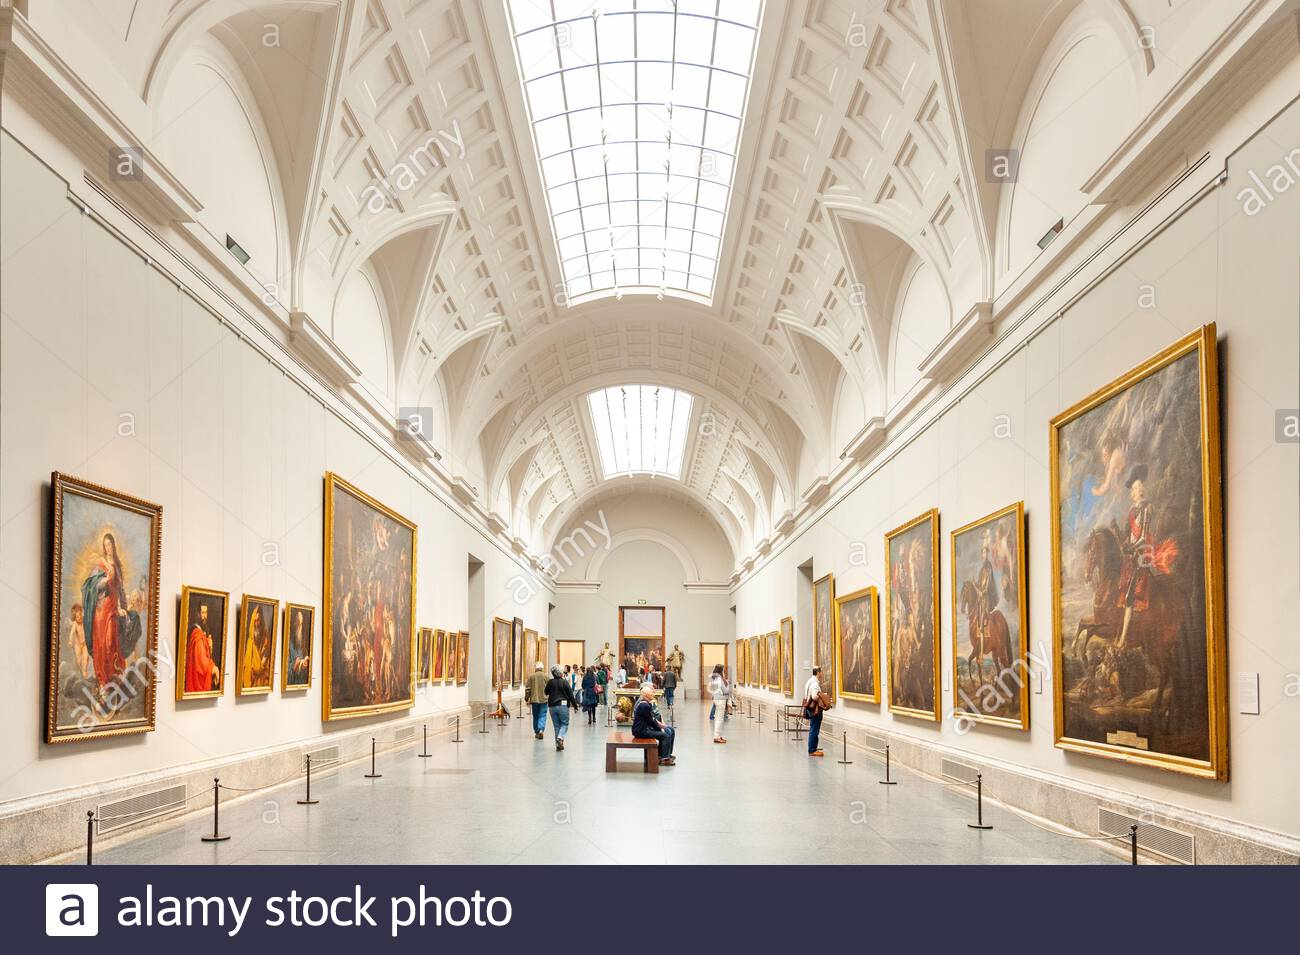 The top 10 museums in Spain